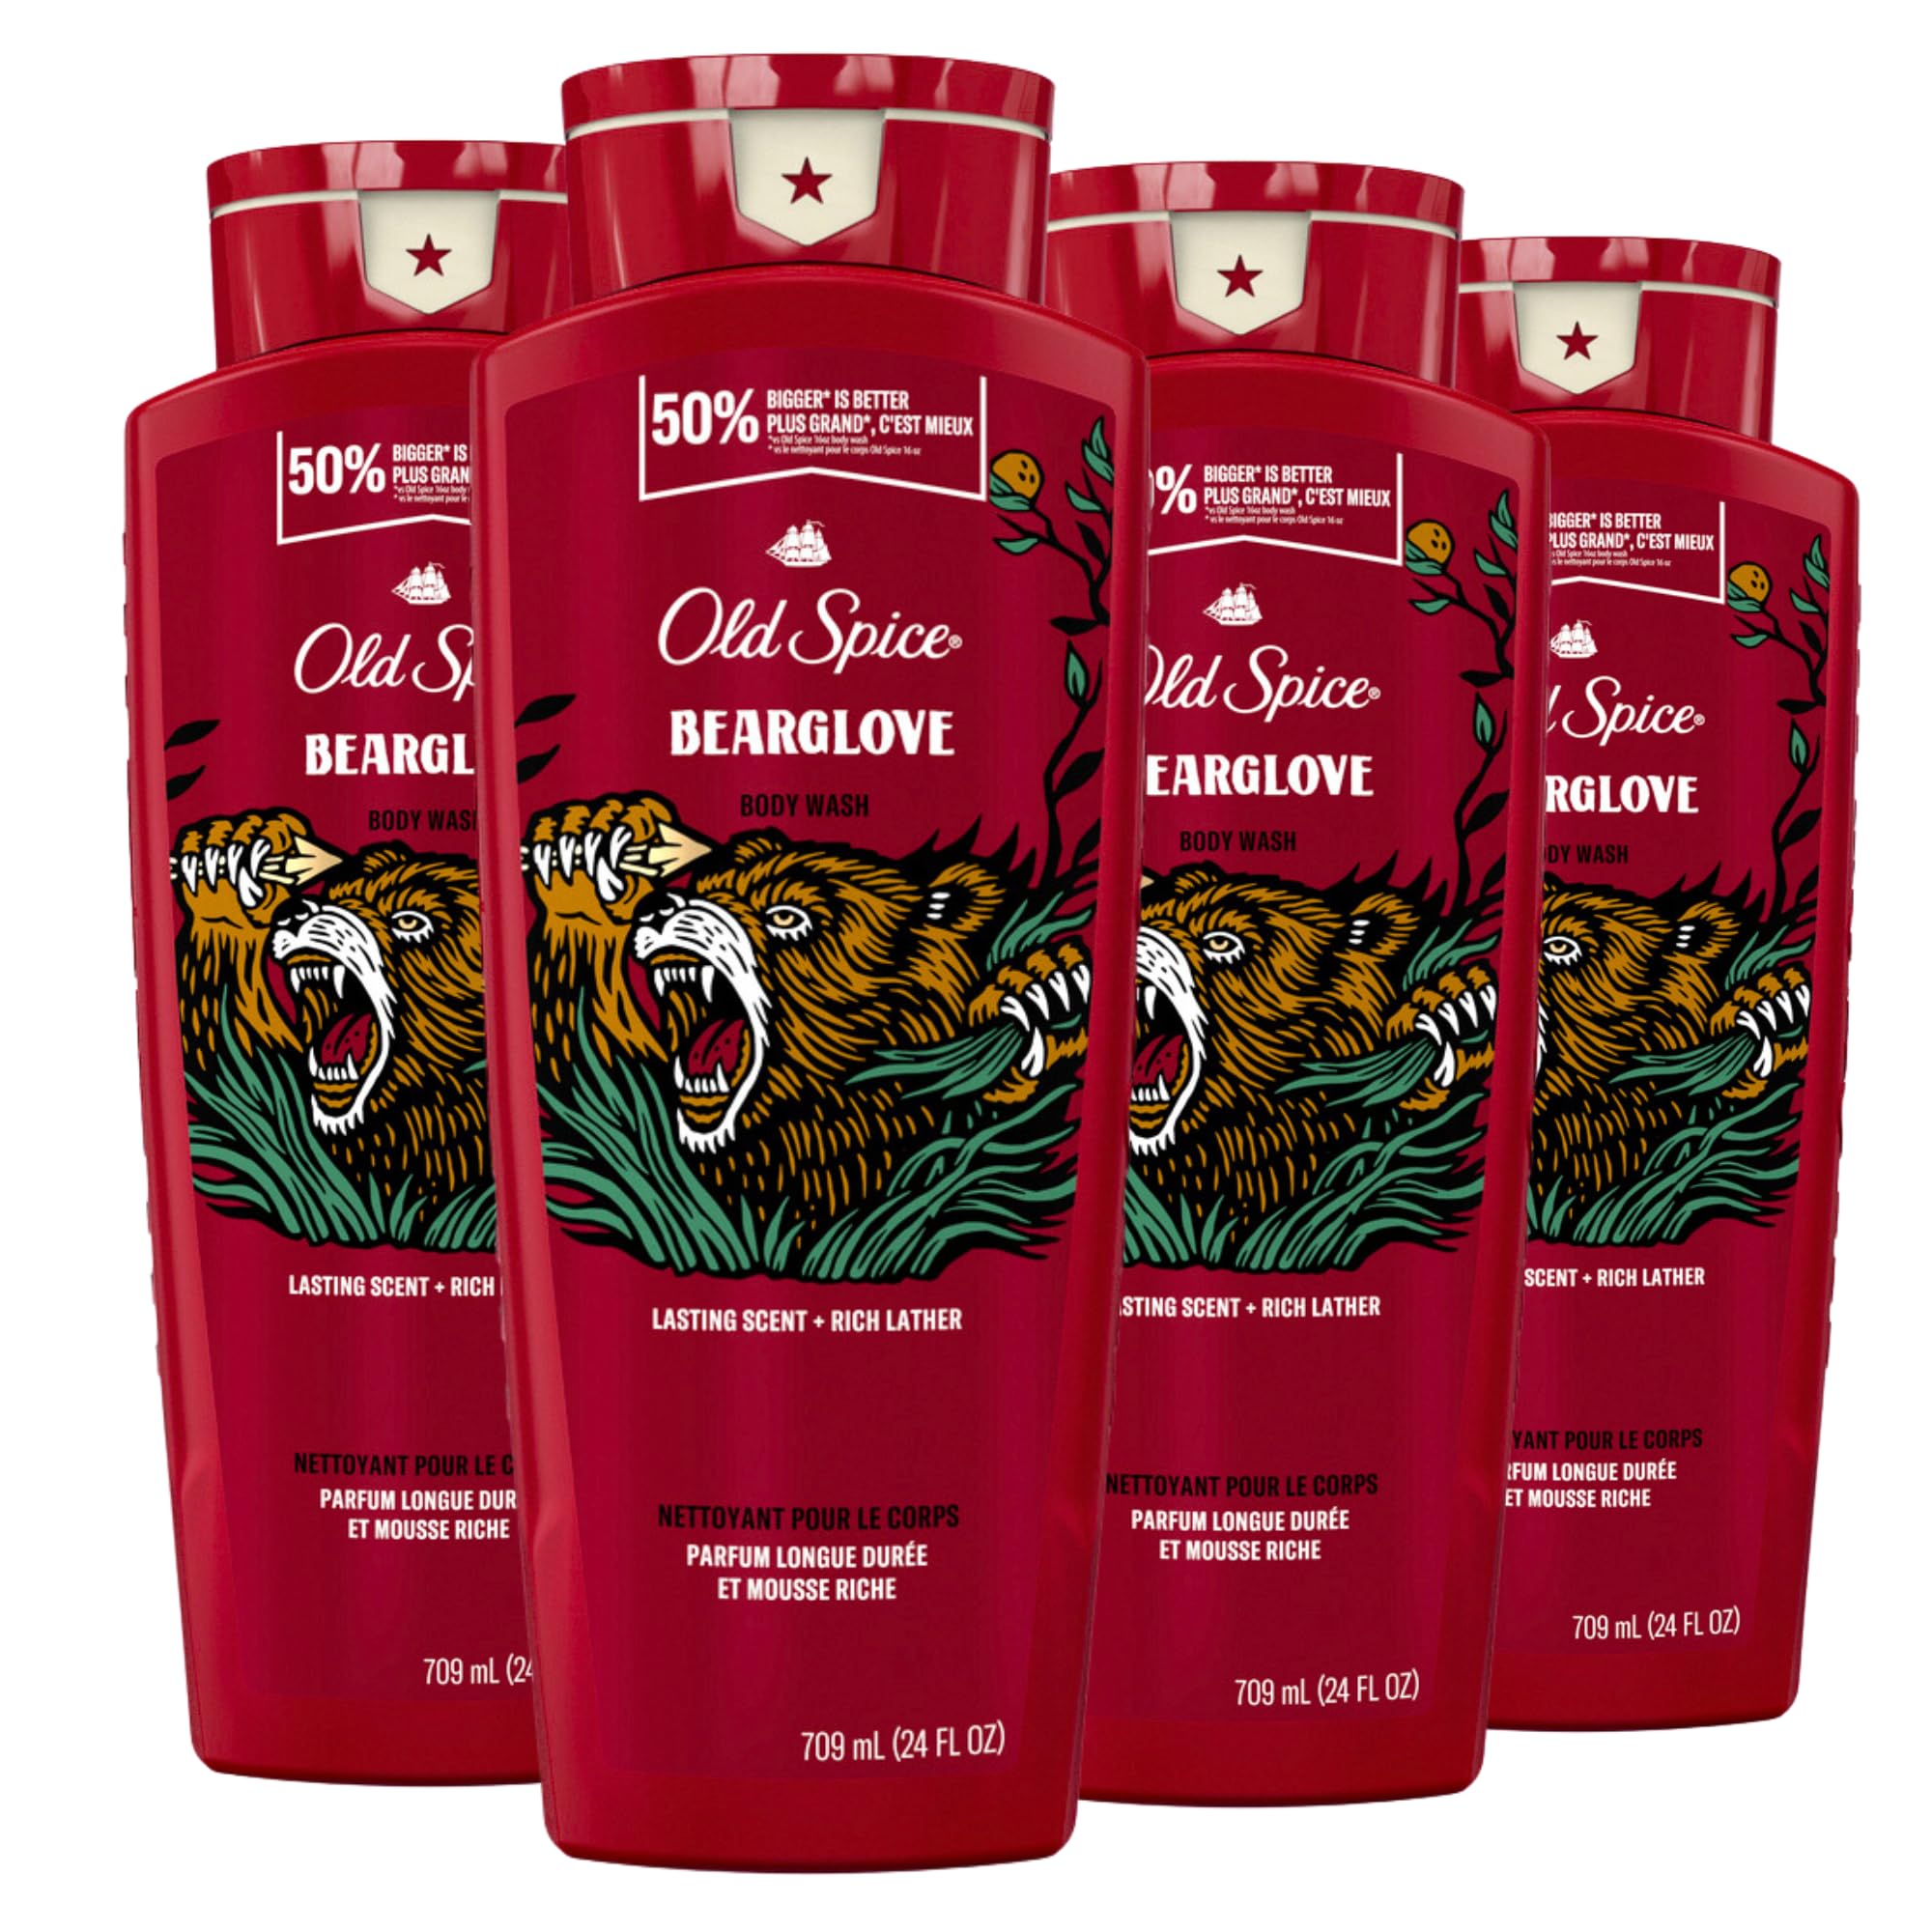 Old Spice Body Wash for Men, Bearglove, Long Lasting Lather, 24 fl oz (Pack of 4)